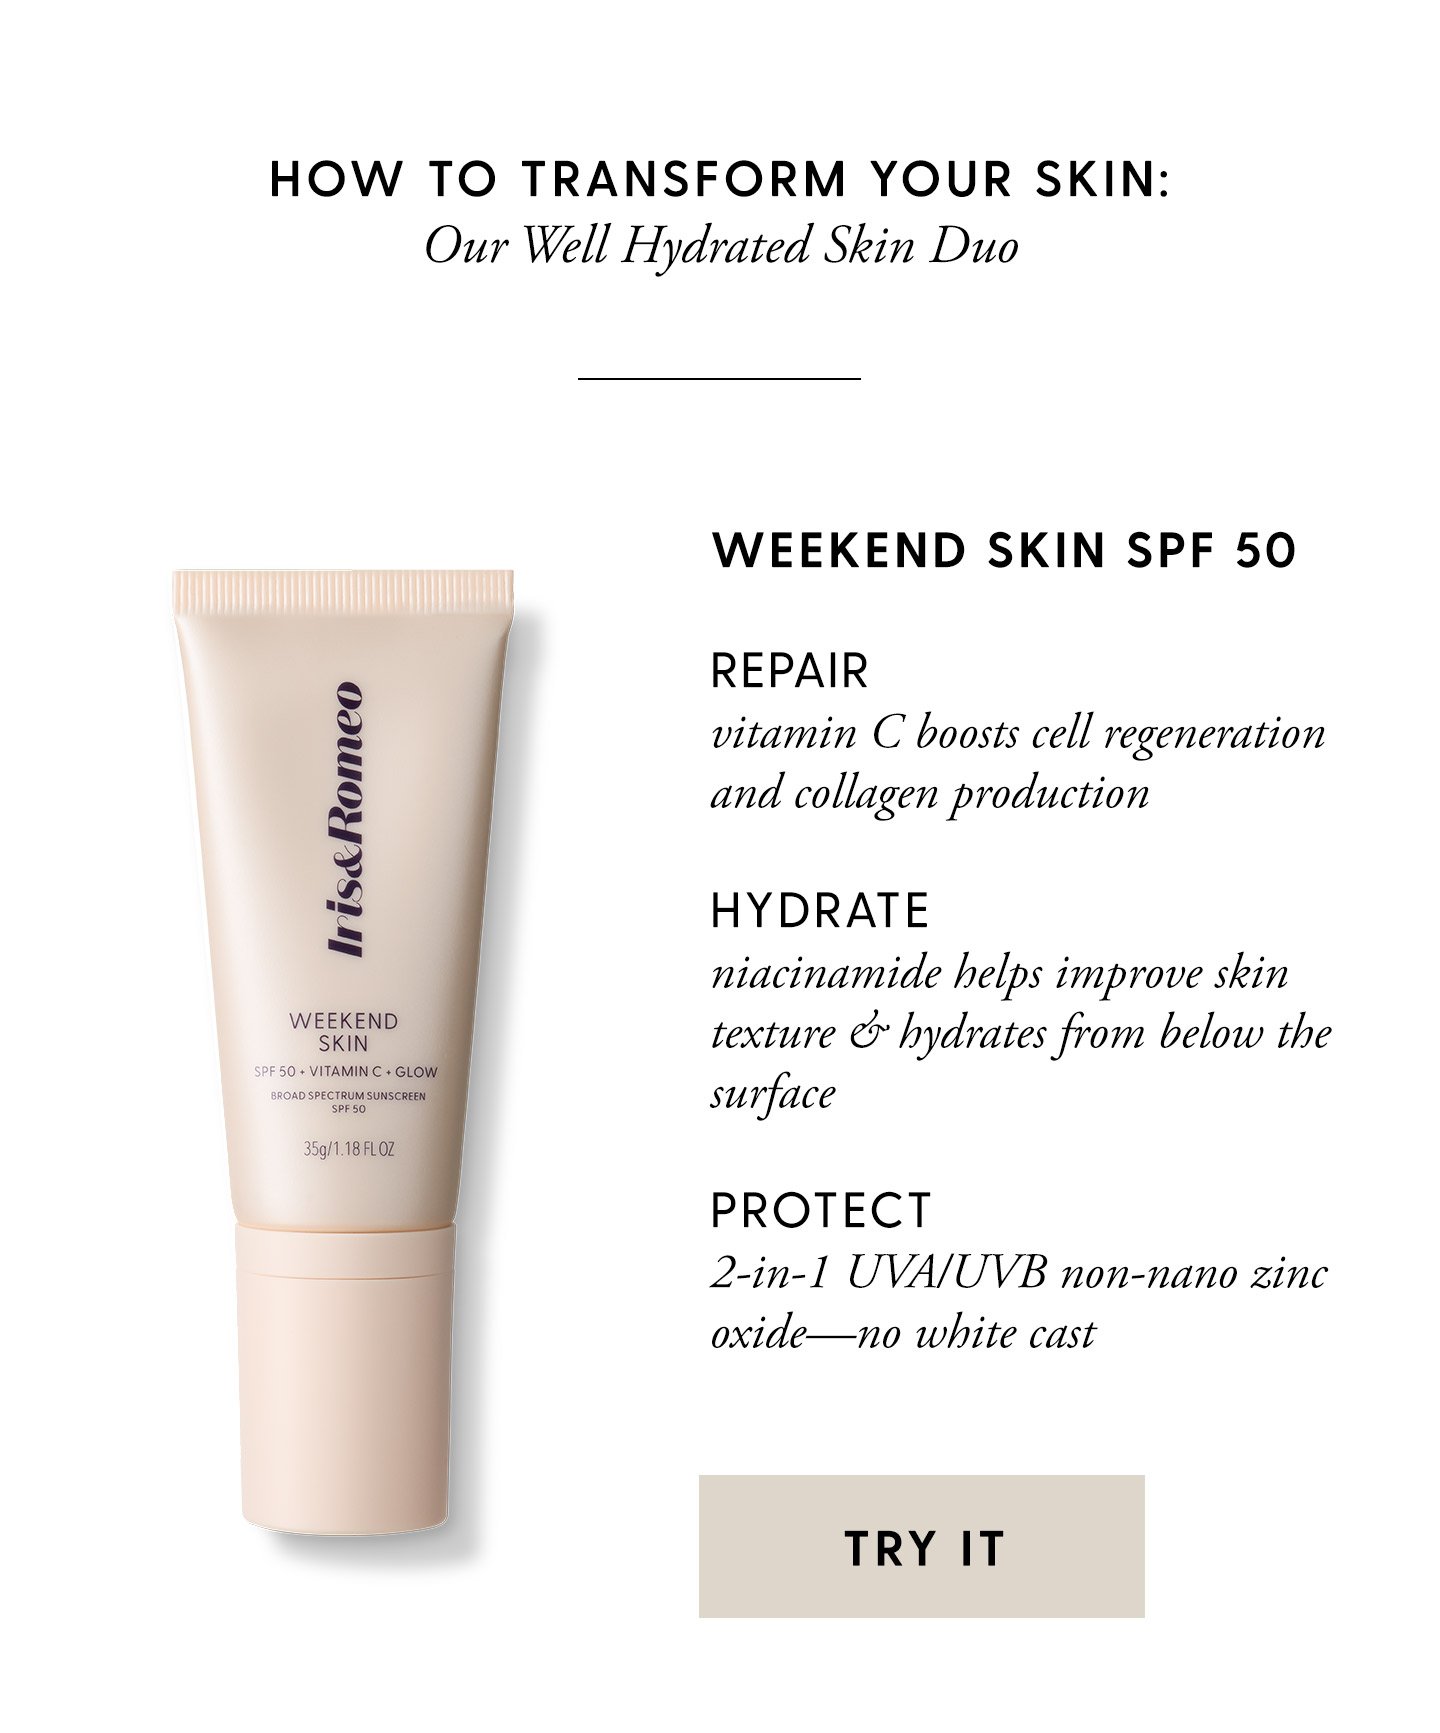 How to transform your skin